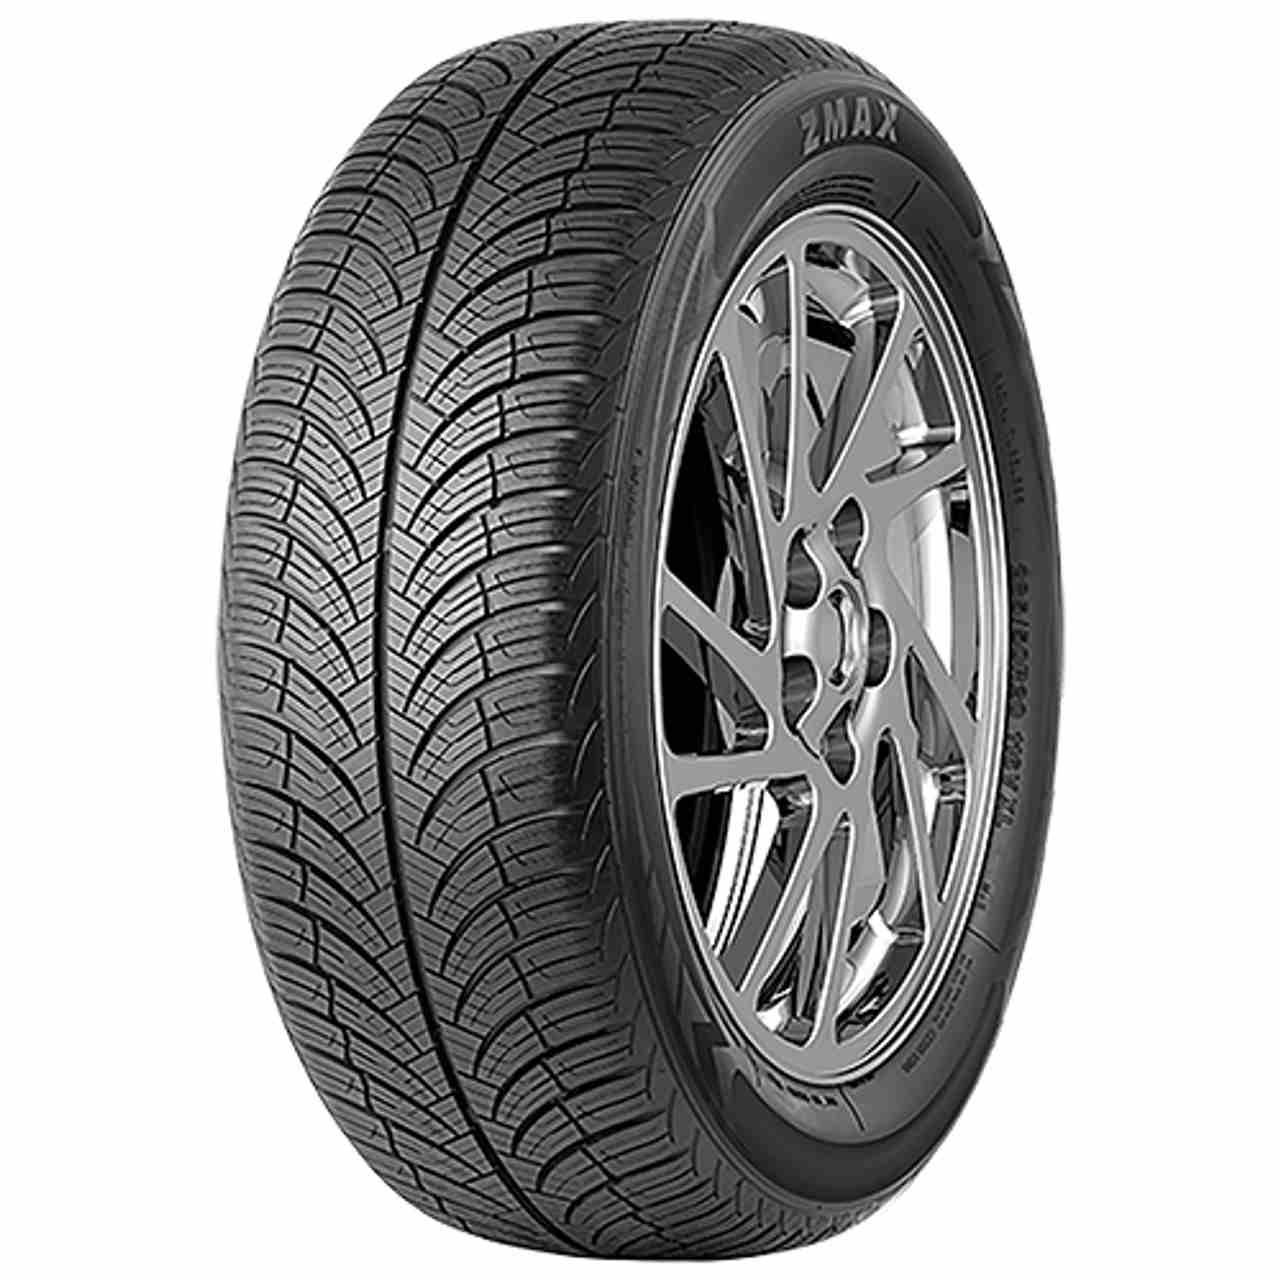 ZMAX X-SPIDER A/S 235/55R18 104V BSW